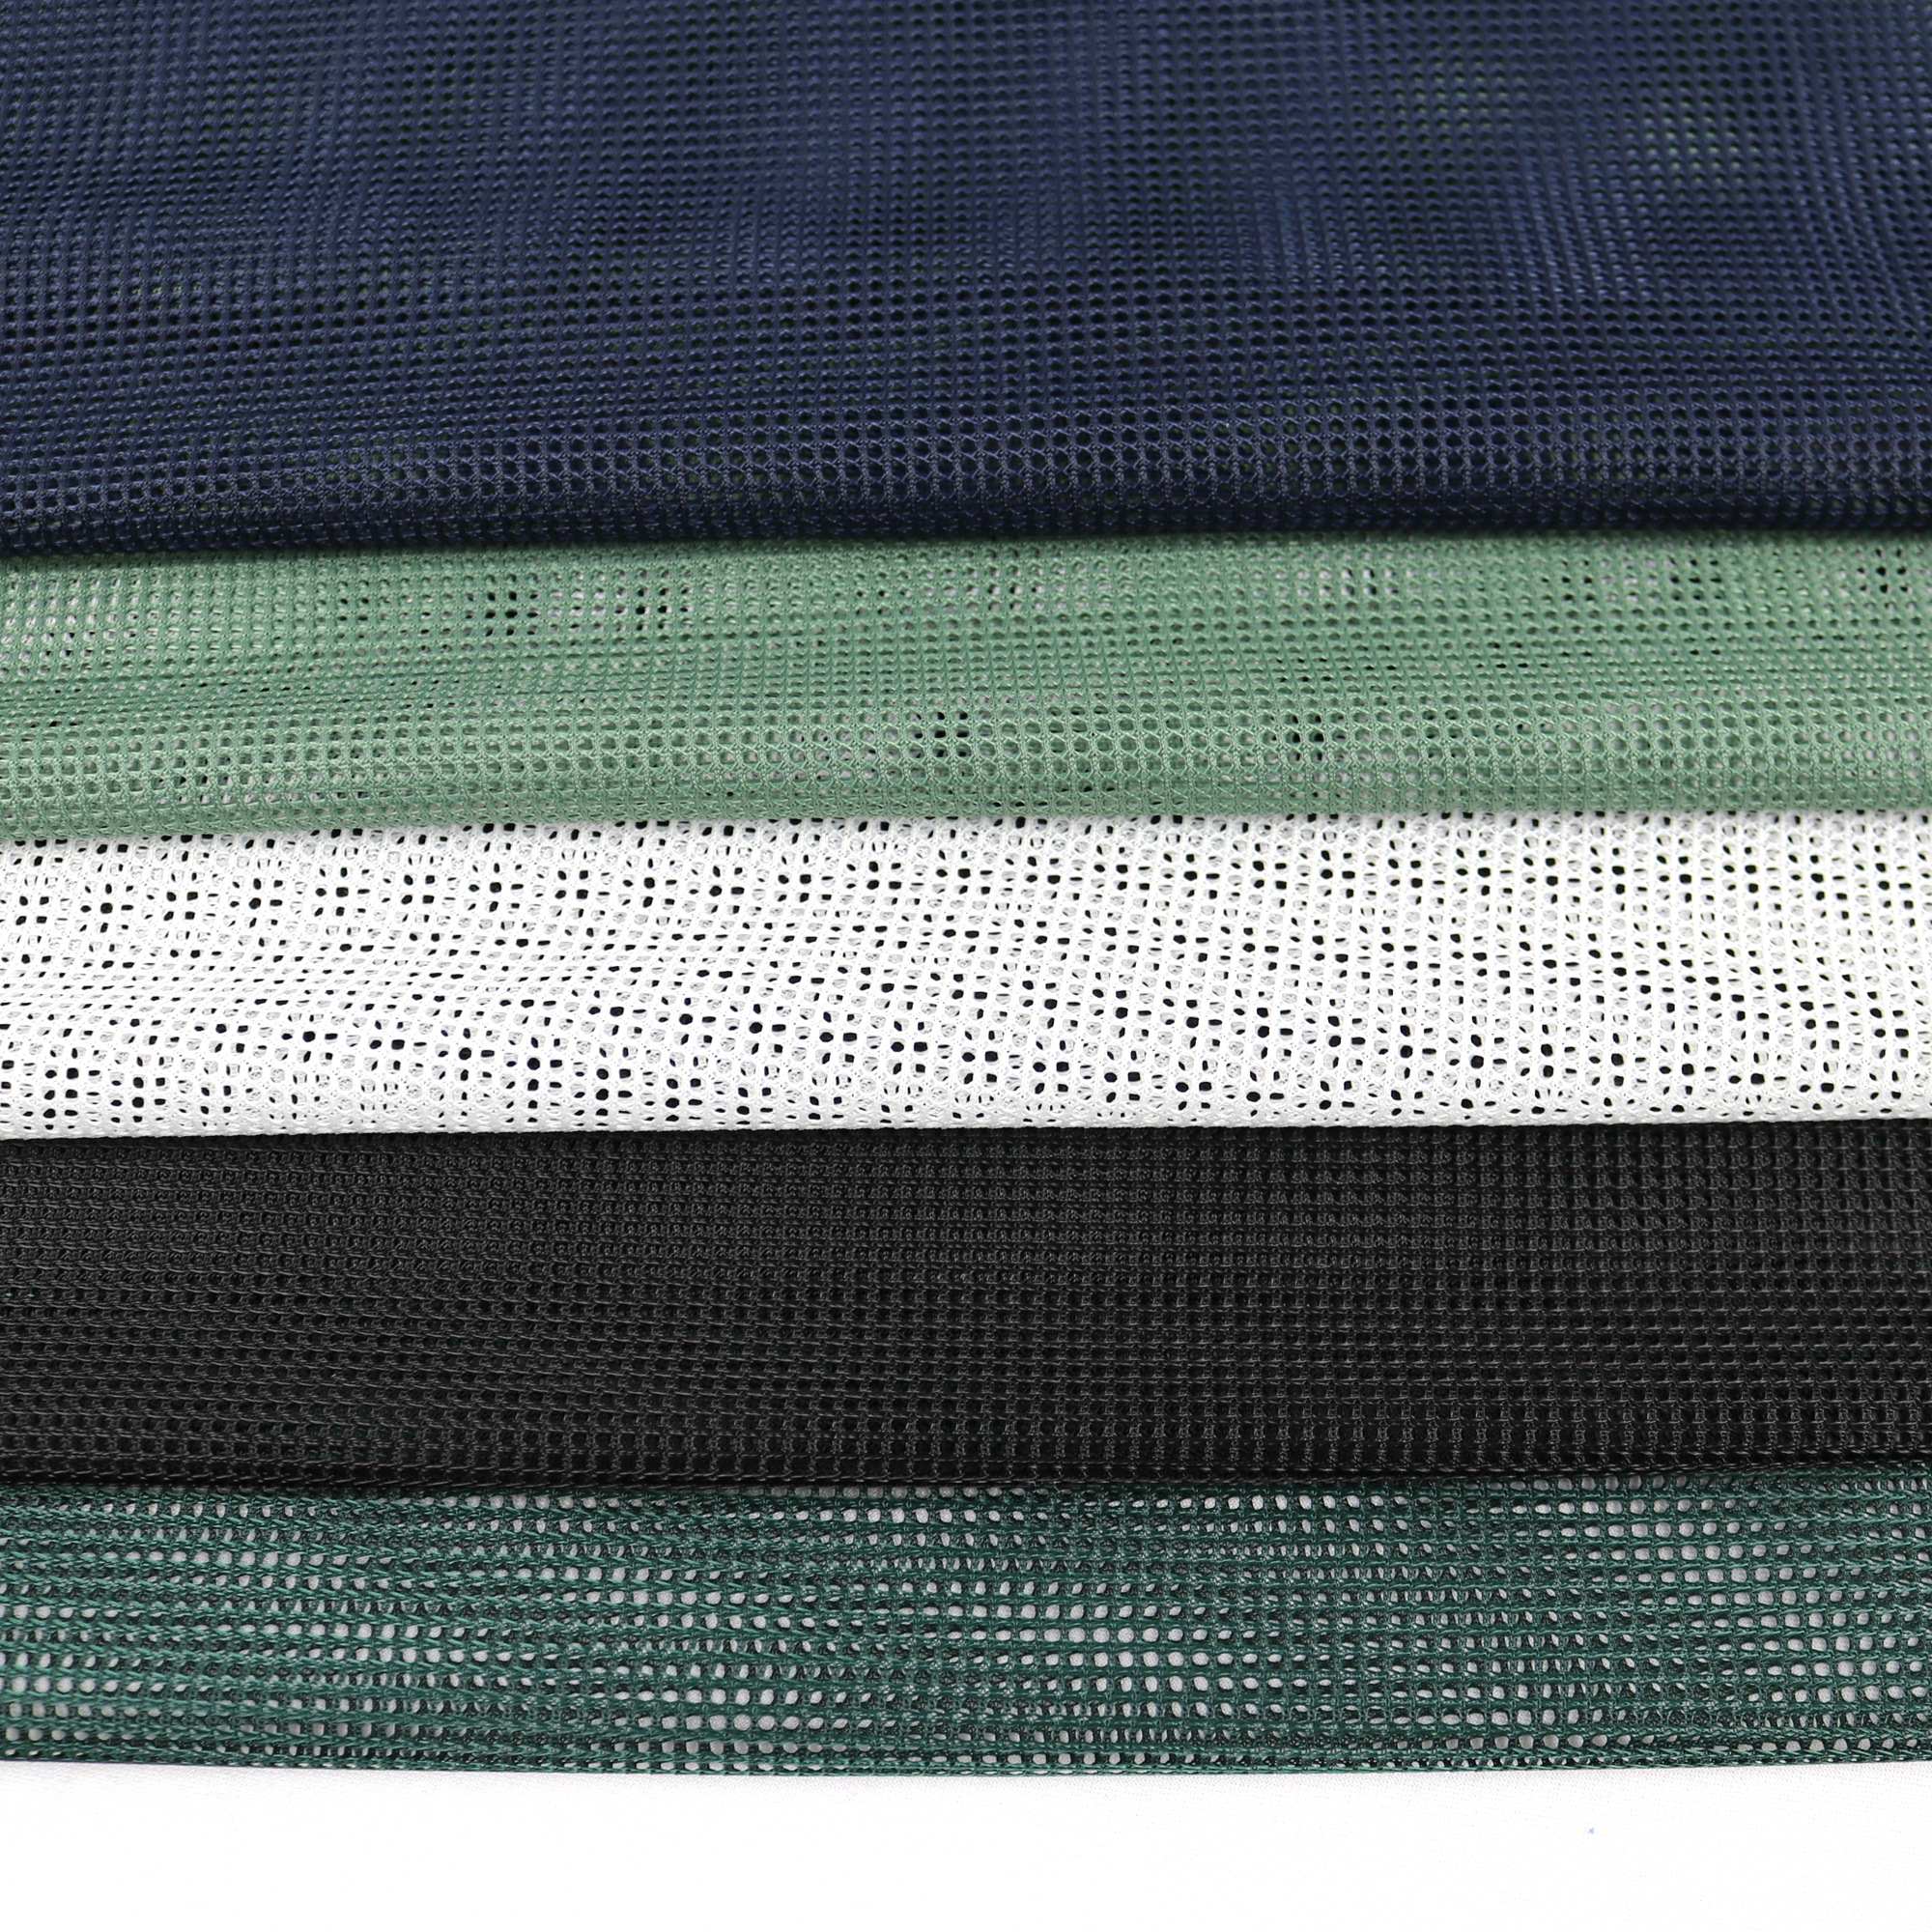 Buy Polyester Square Knit Mesh Fabric by the Yard, 58-60 Wide, 5